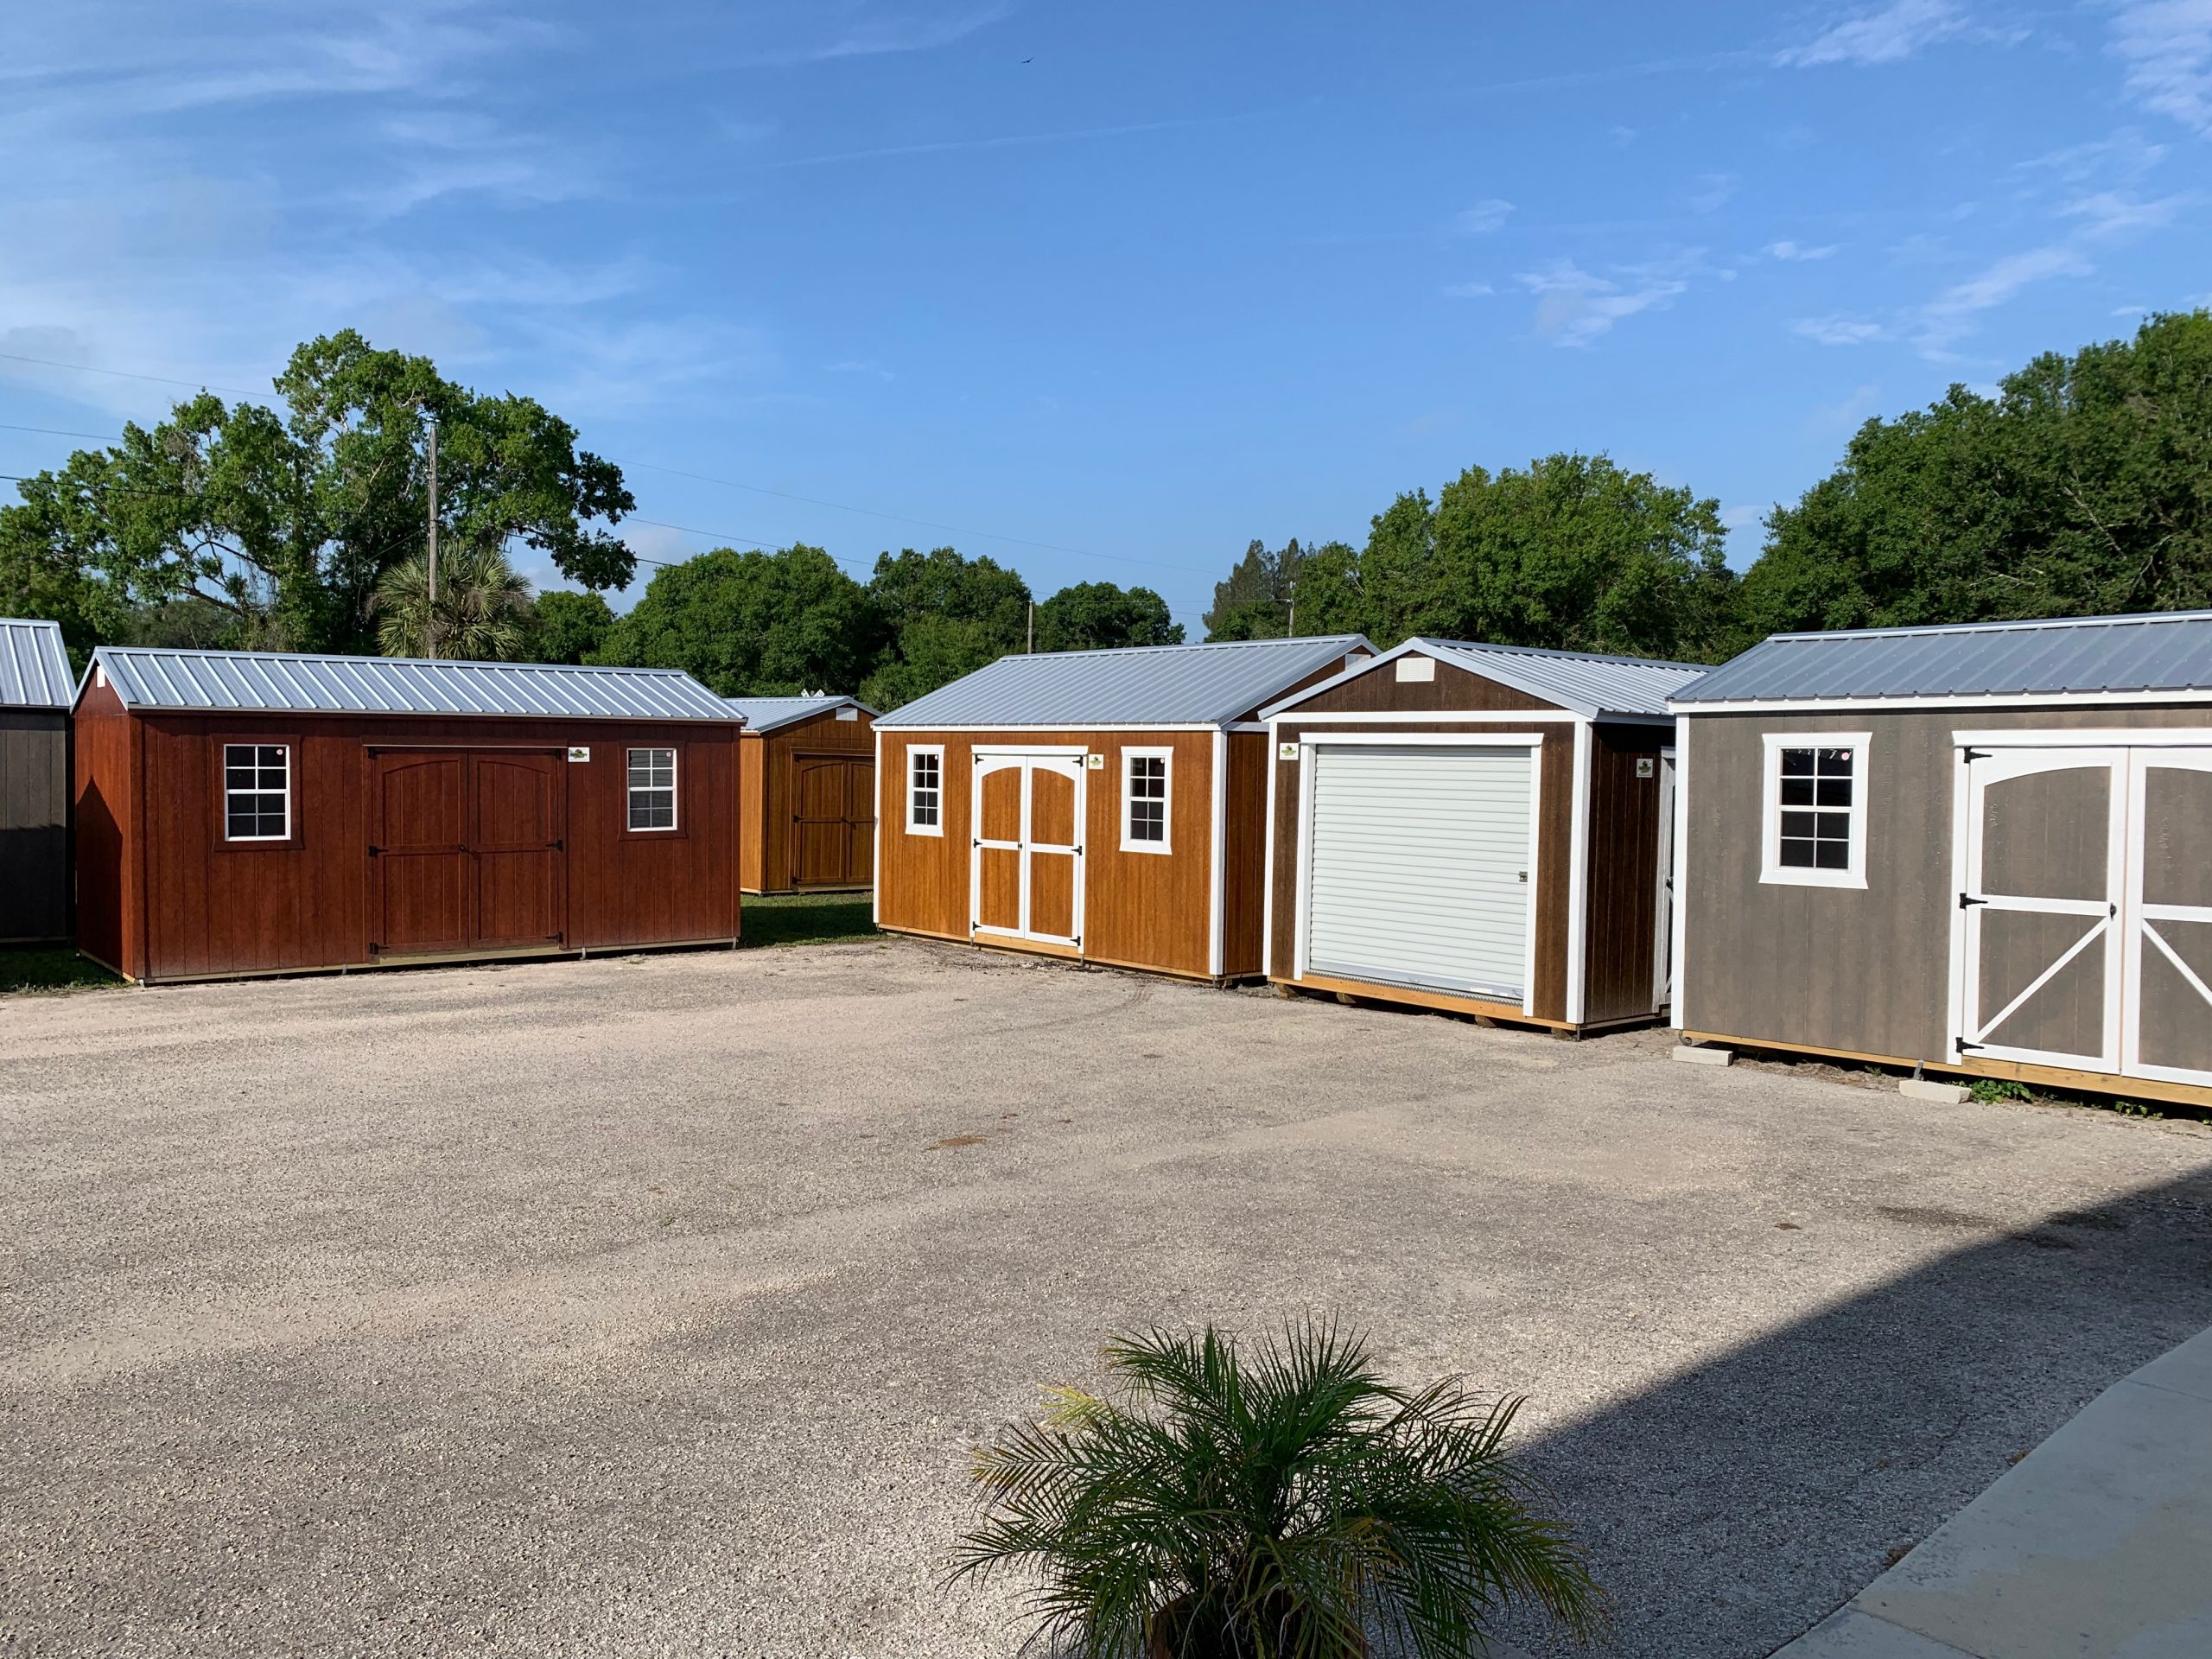 sheds and barns for sale in arcadia fl